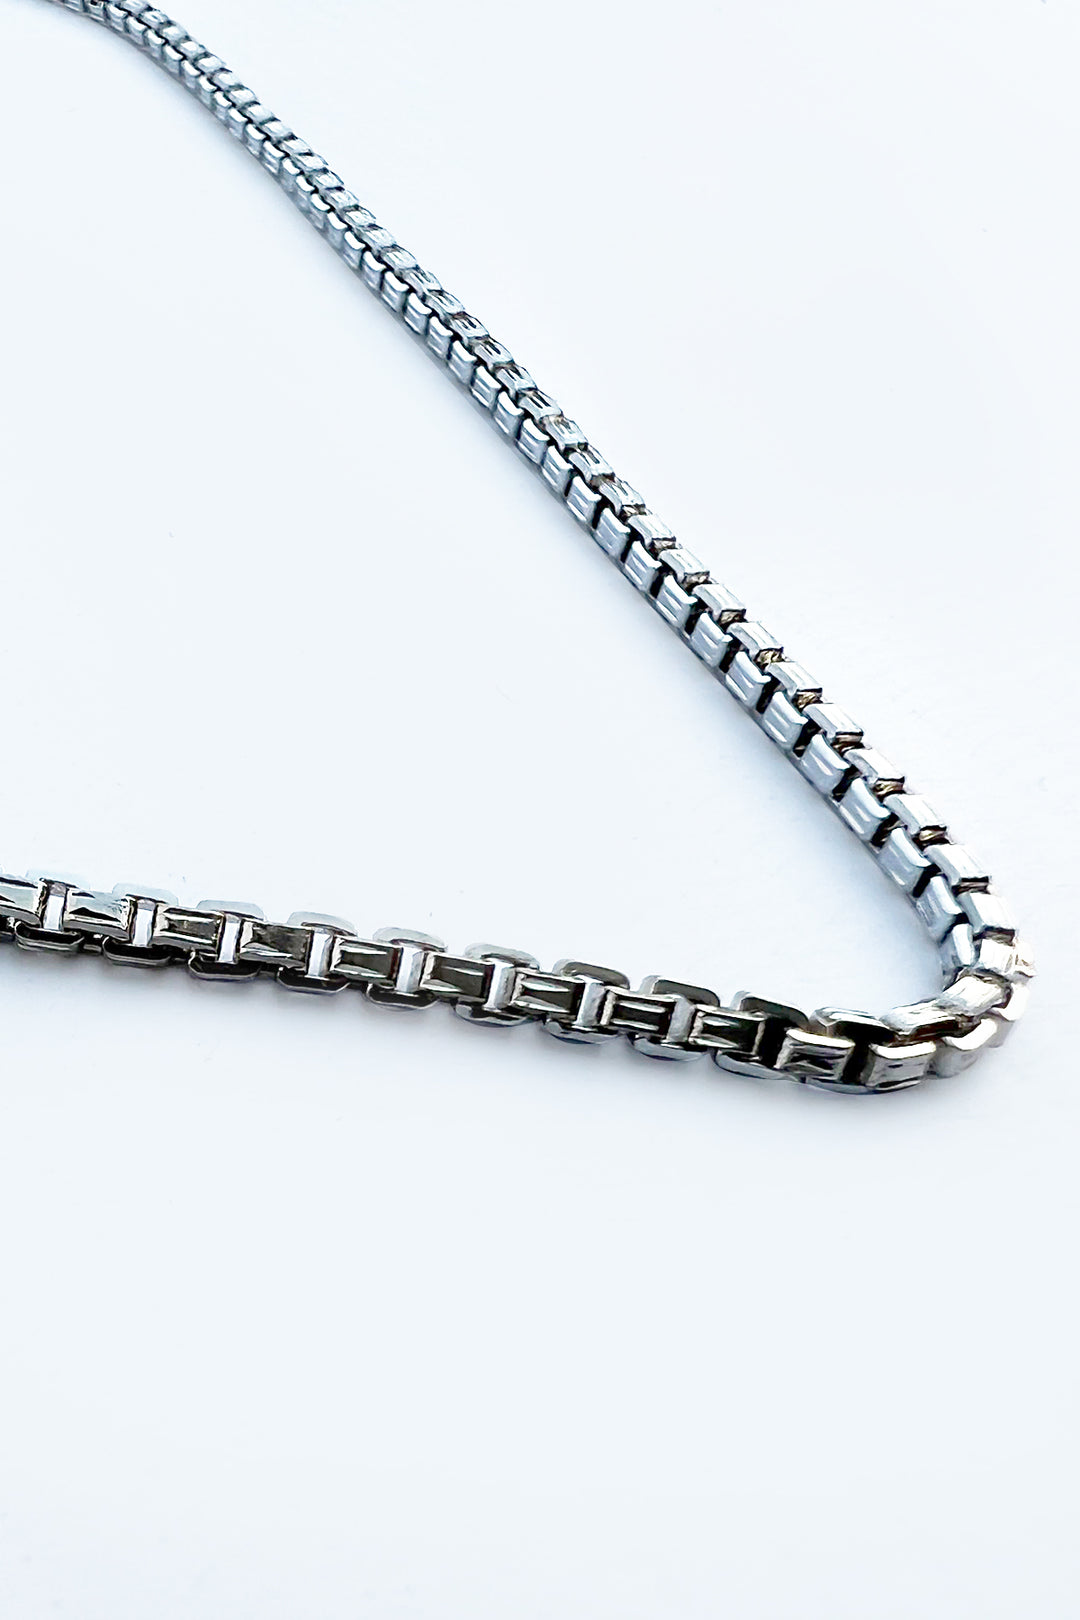 Royal Chain Sterling Silver - S23 - MJW0048